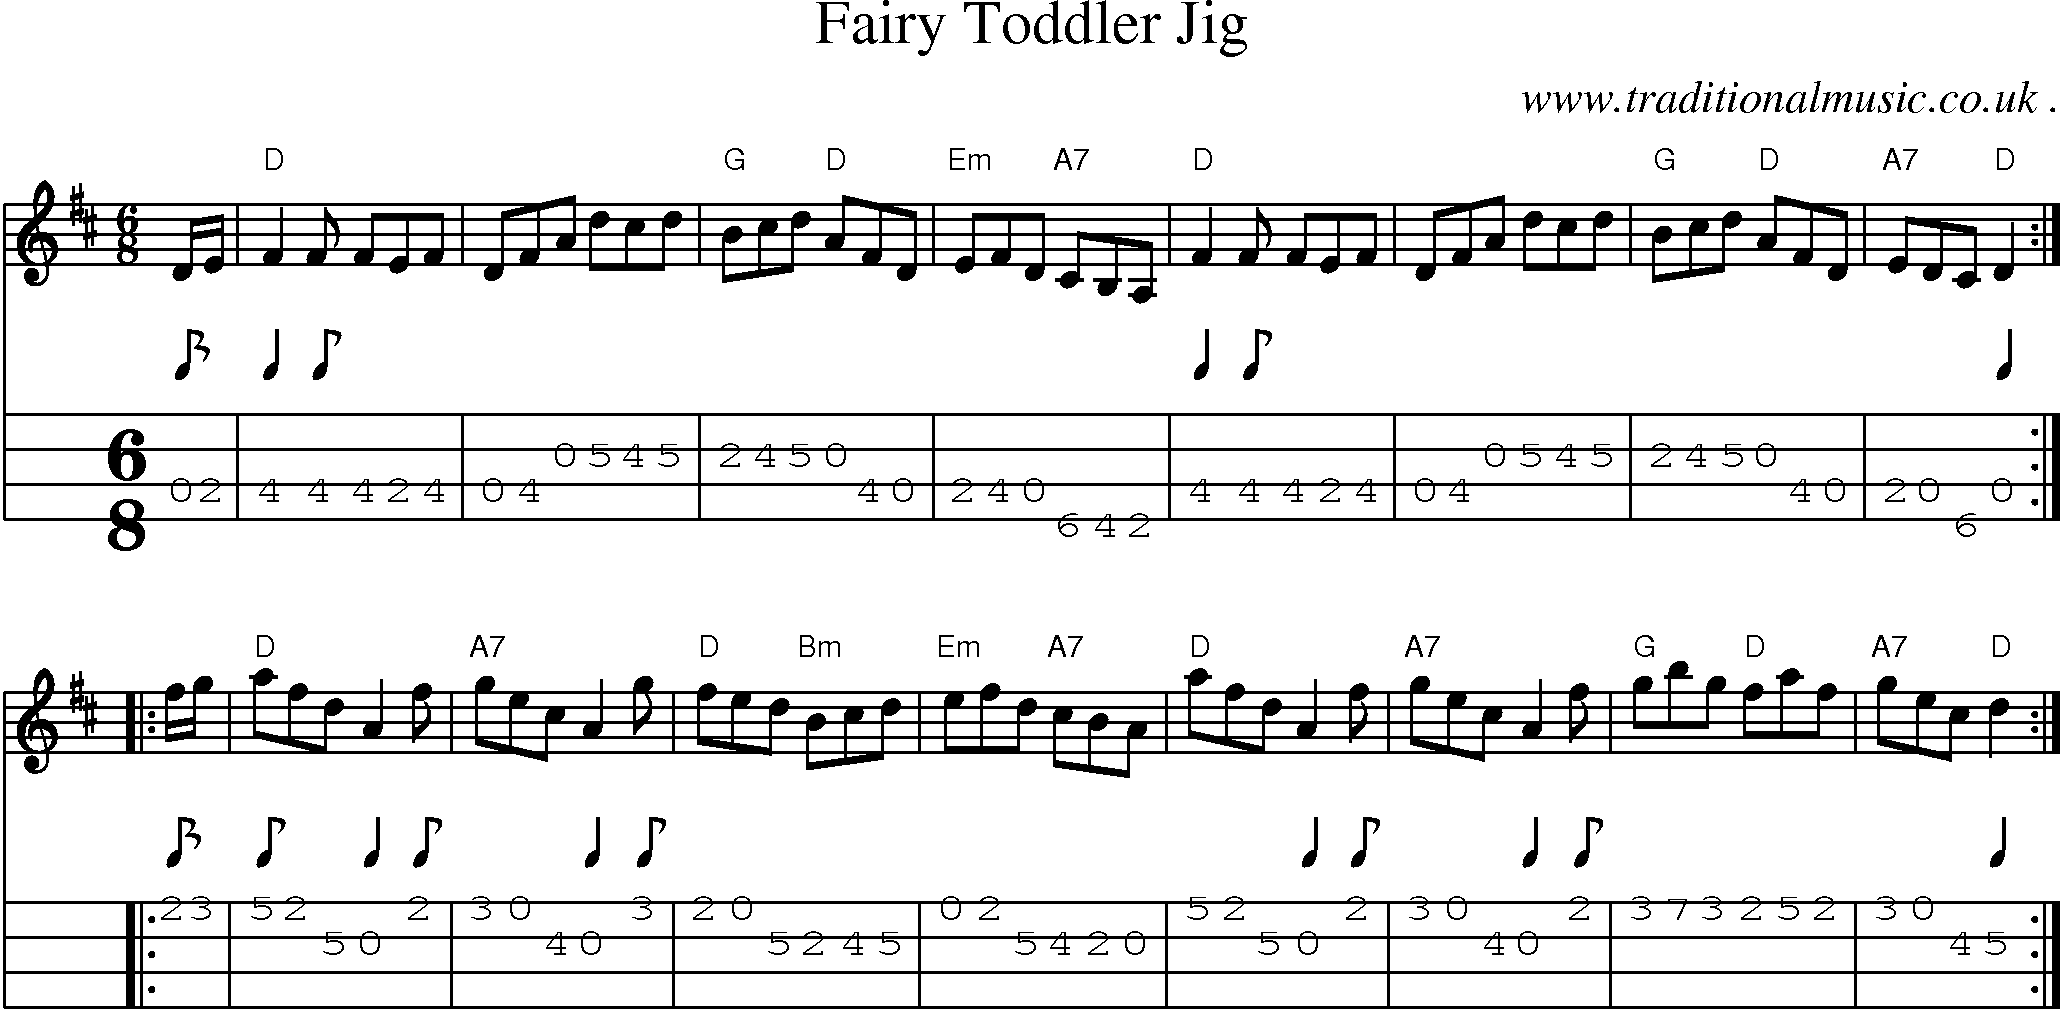 Sheet-music  score, Chords and Mandolin Tabs for Fairy Toddler Jig